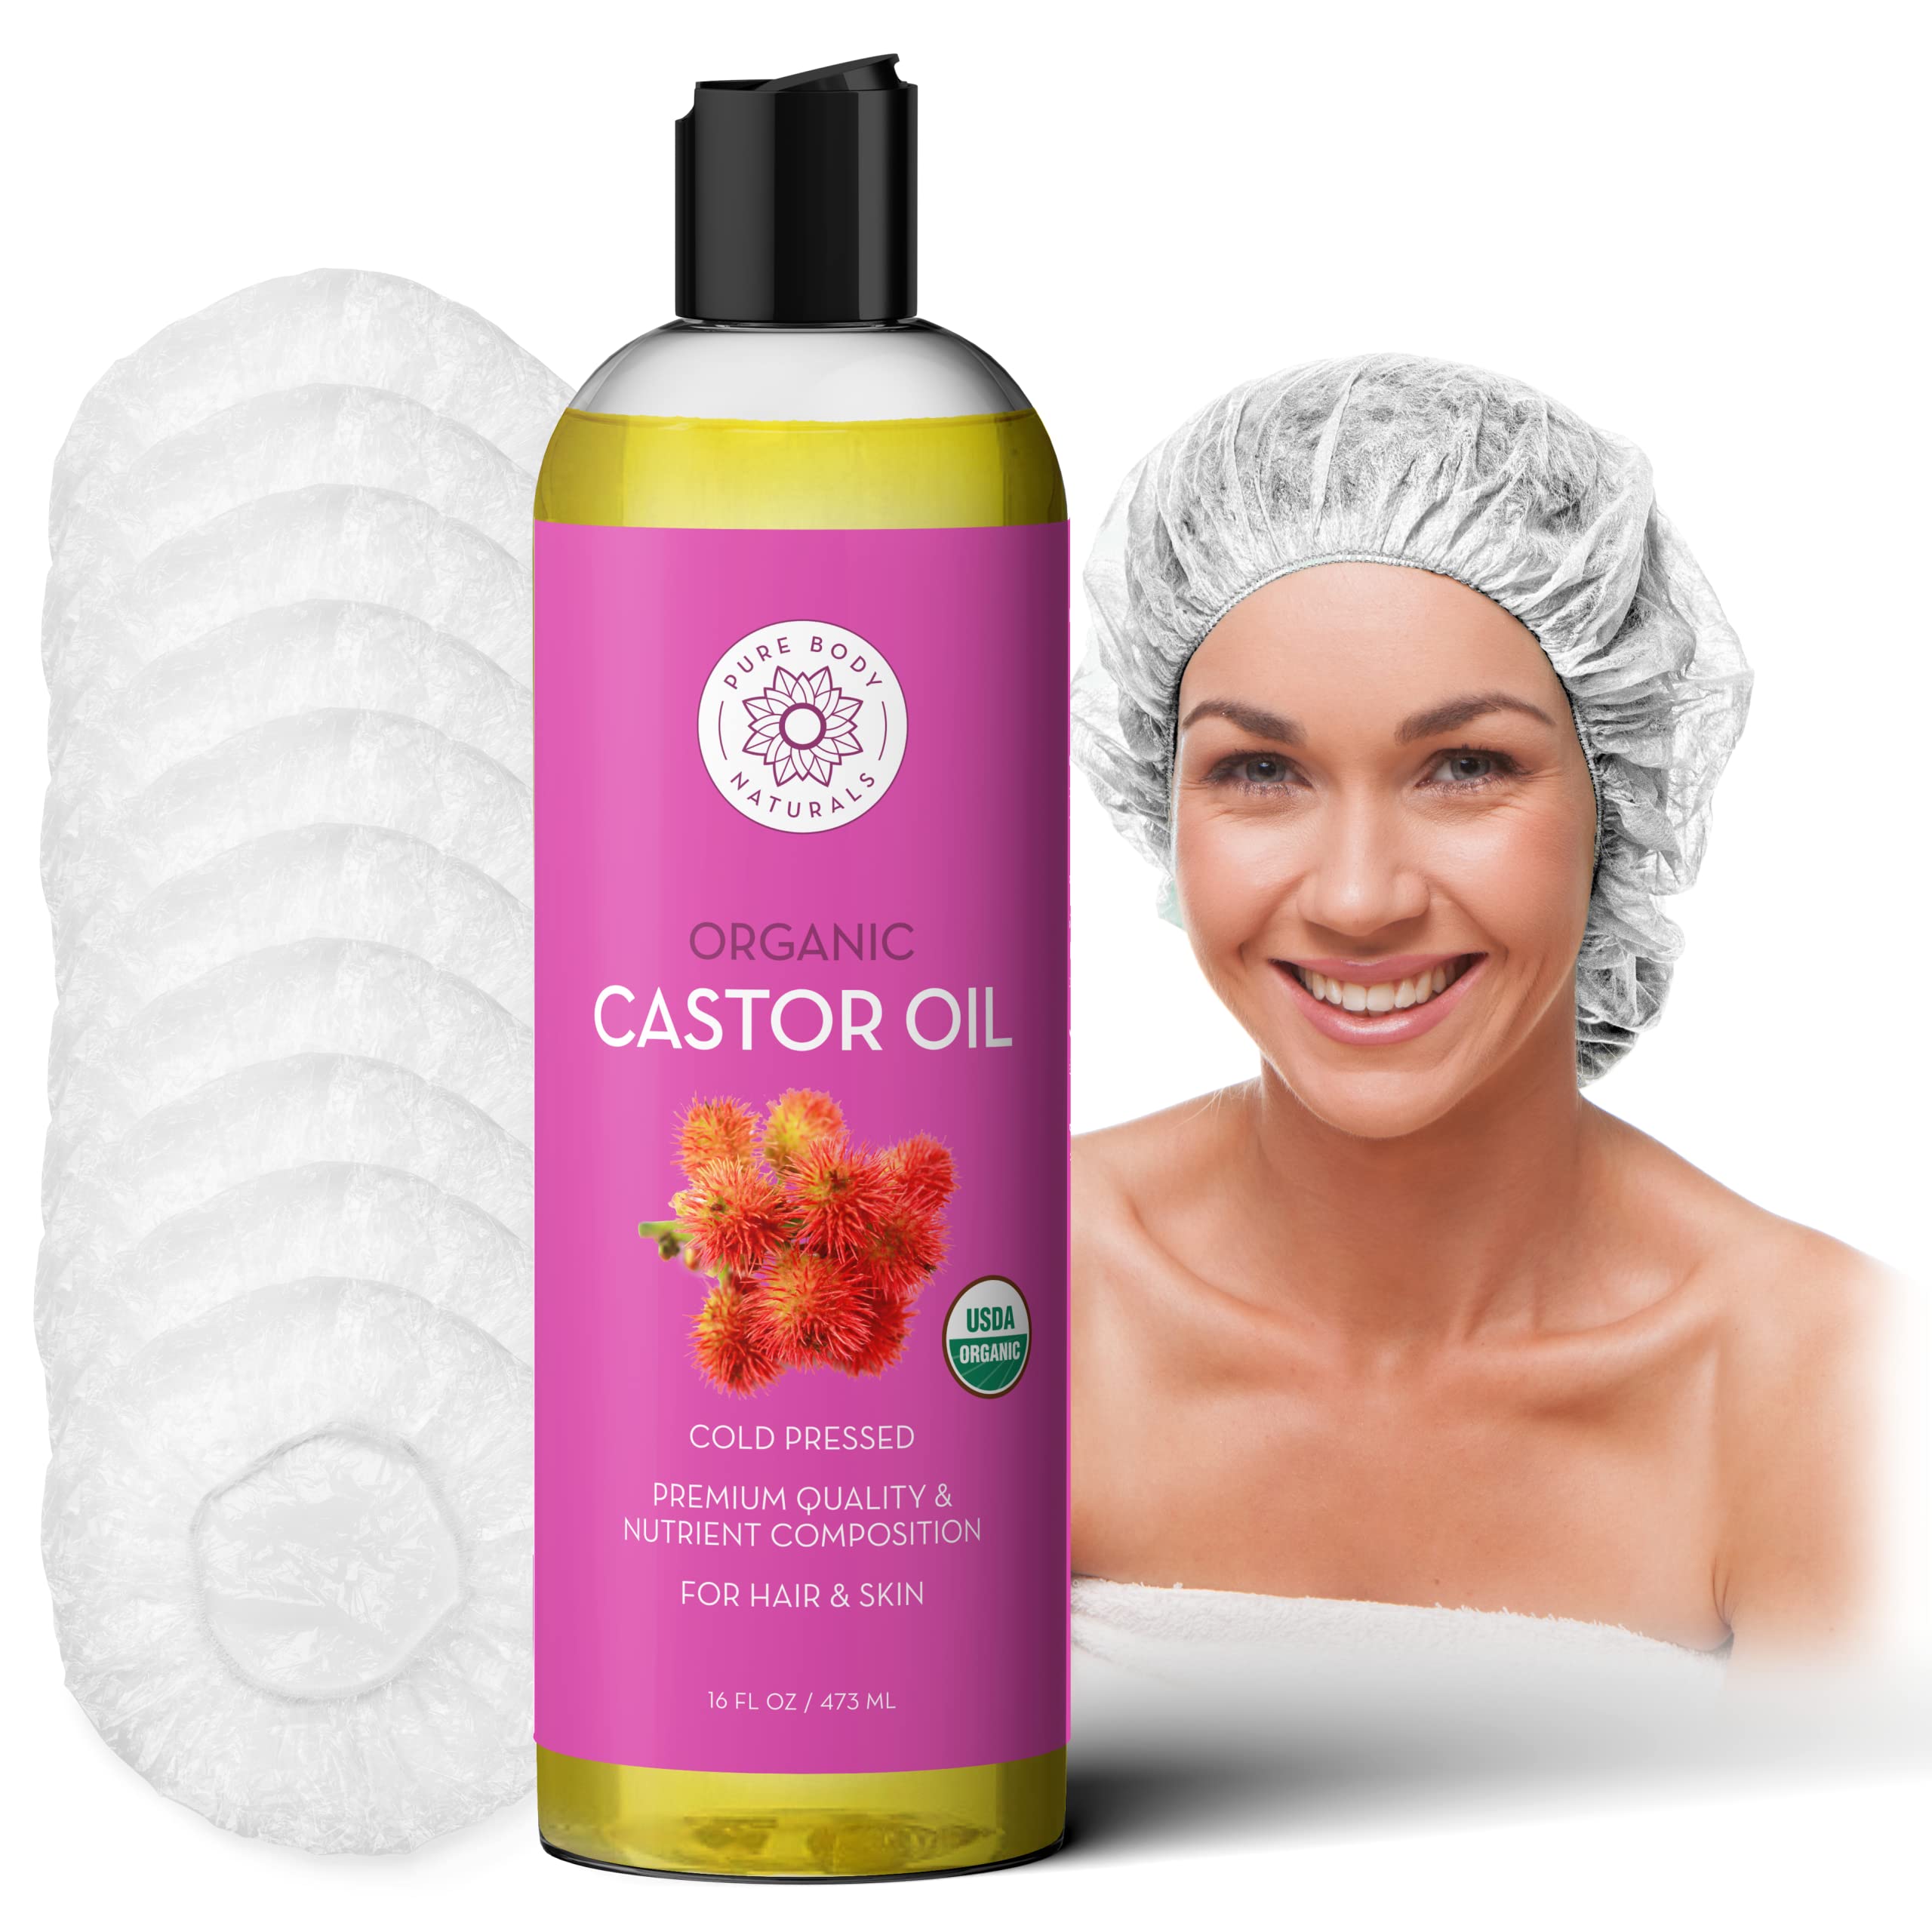 Pure Body Naturals Castor Oil for Hair Growth - includes Natural DIY Castor Oil Hair Mask Kit - for thicker, fuller hair in both men and women, 16 fl oz